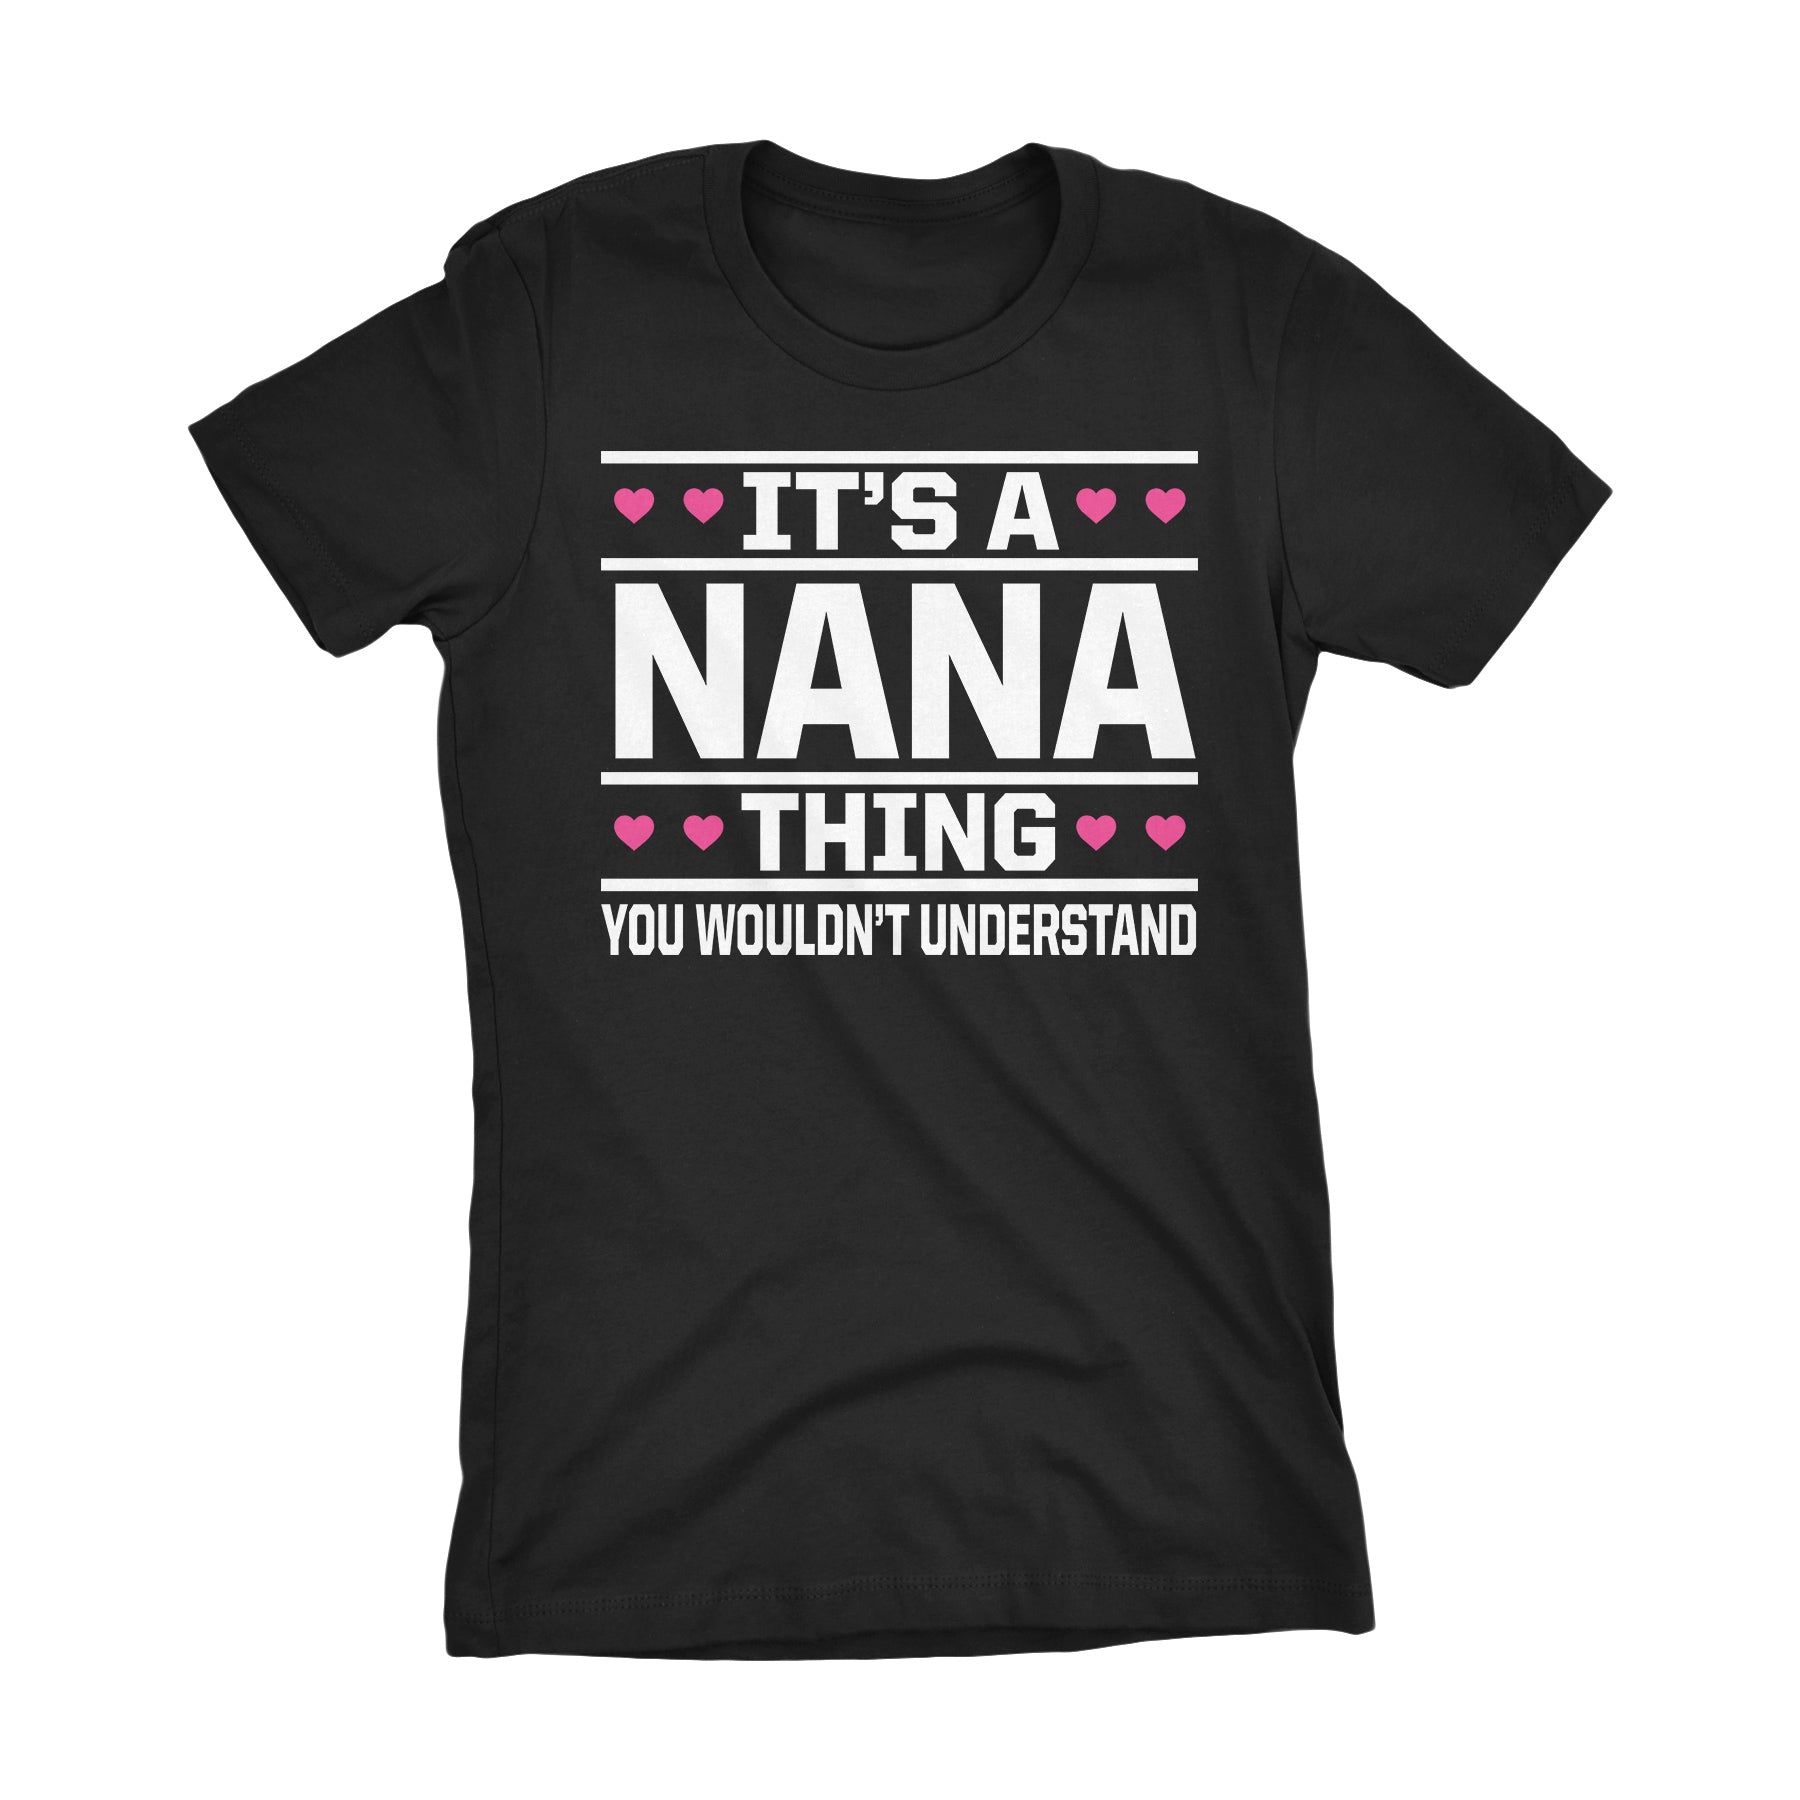 It's A NANA Thing You Wouldn't Understand - 003 Grandmother Ladies Fit T-shirt